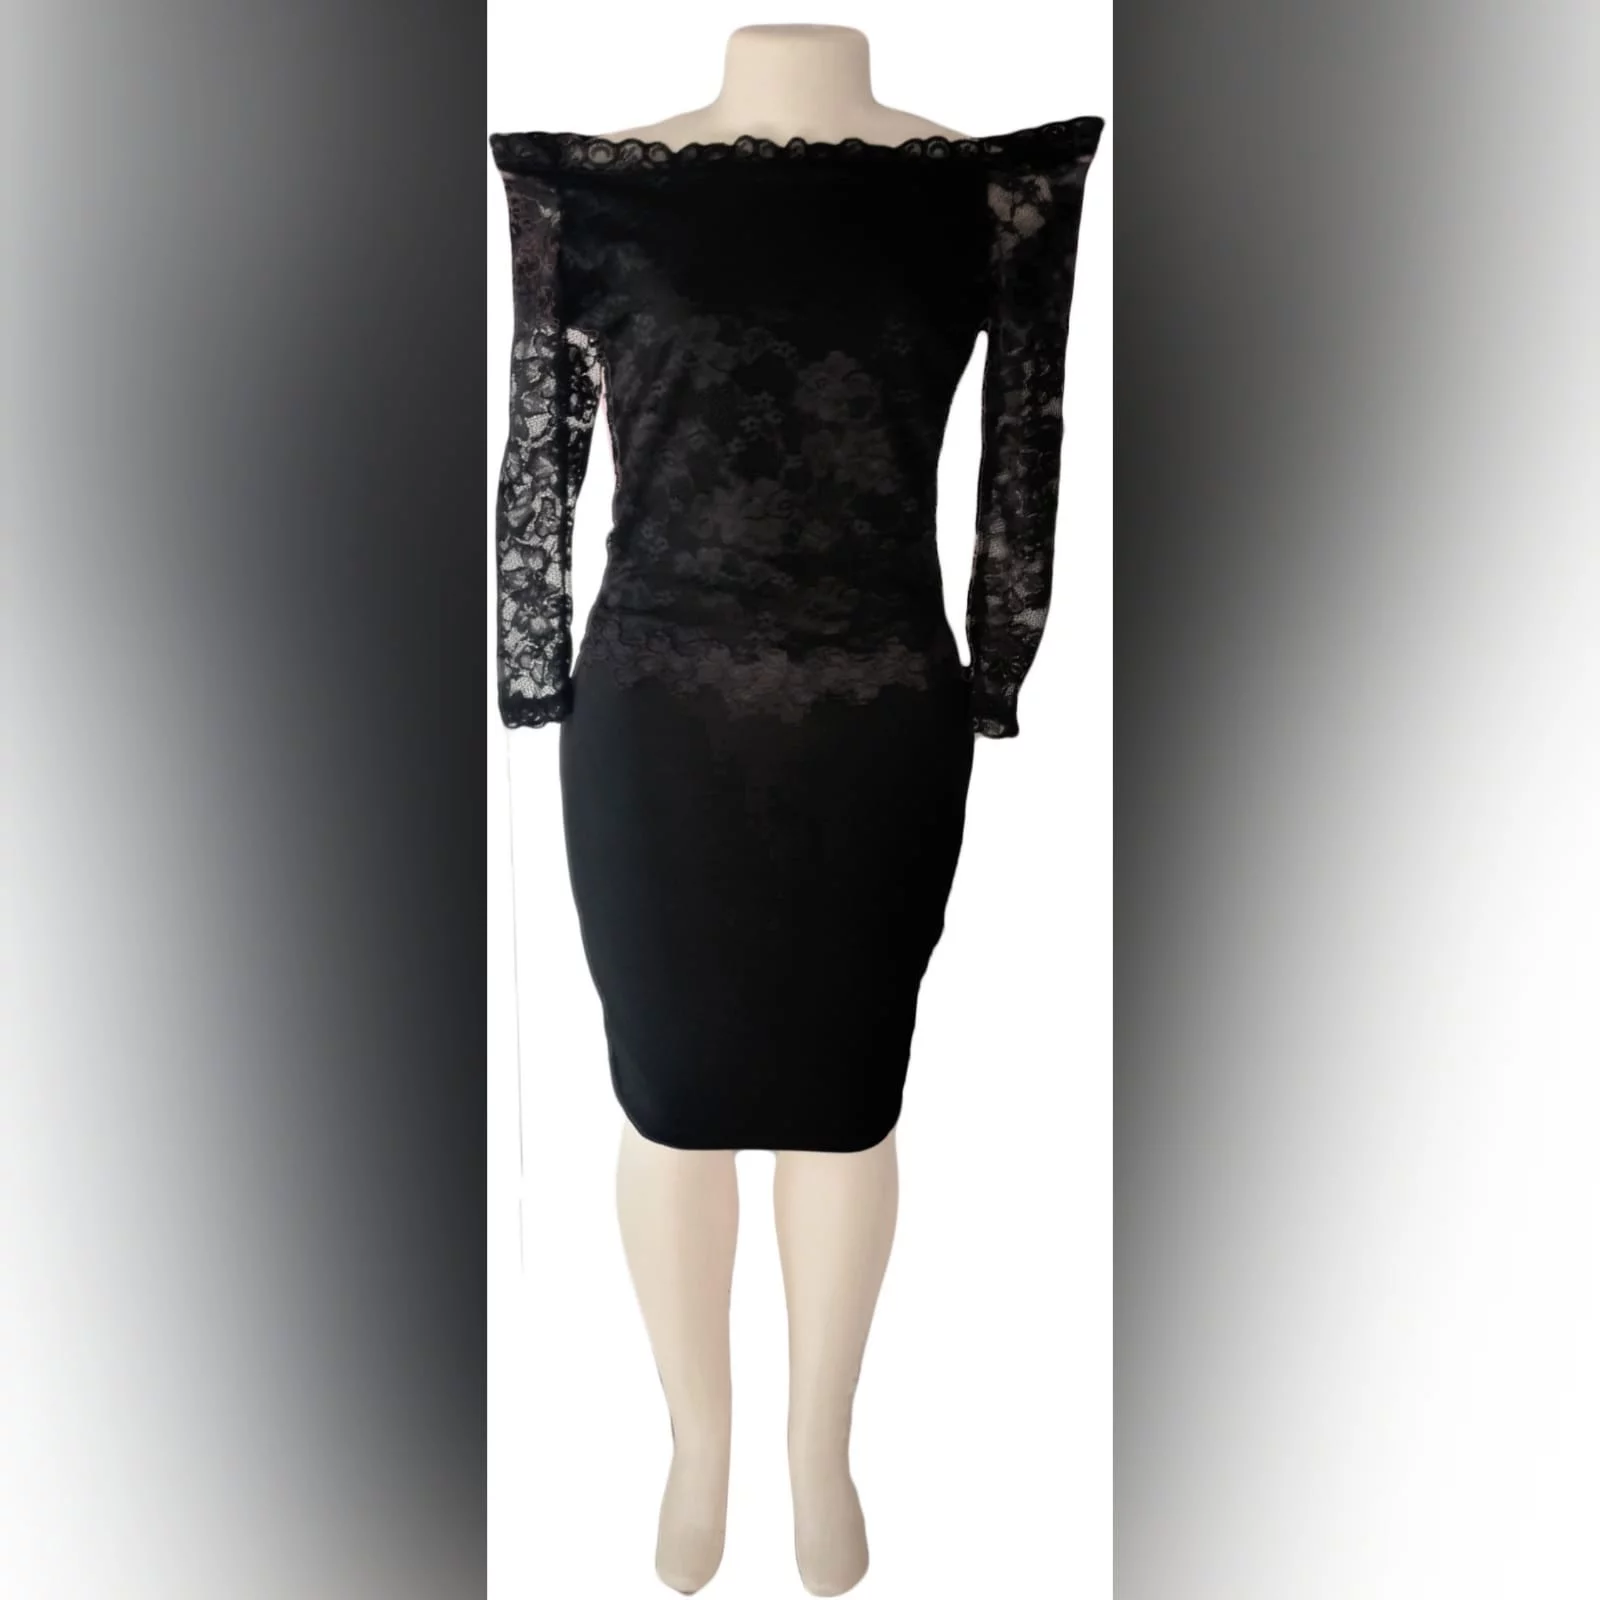 Knee length black fitted evening dress 2 knee length black fitted evening dress. With a stretch lace bodice, off shoulder fit, with long sheer lace sleeves.